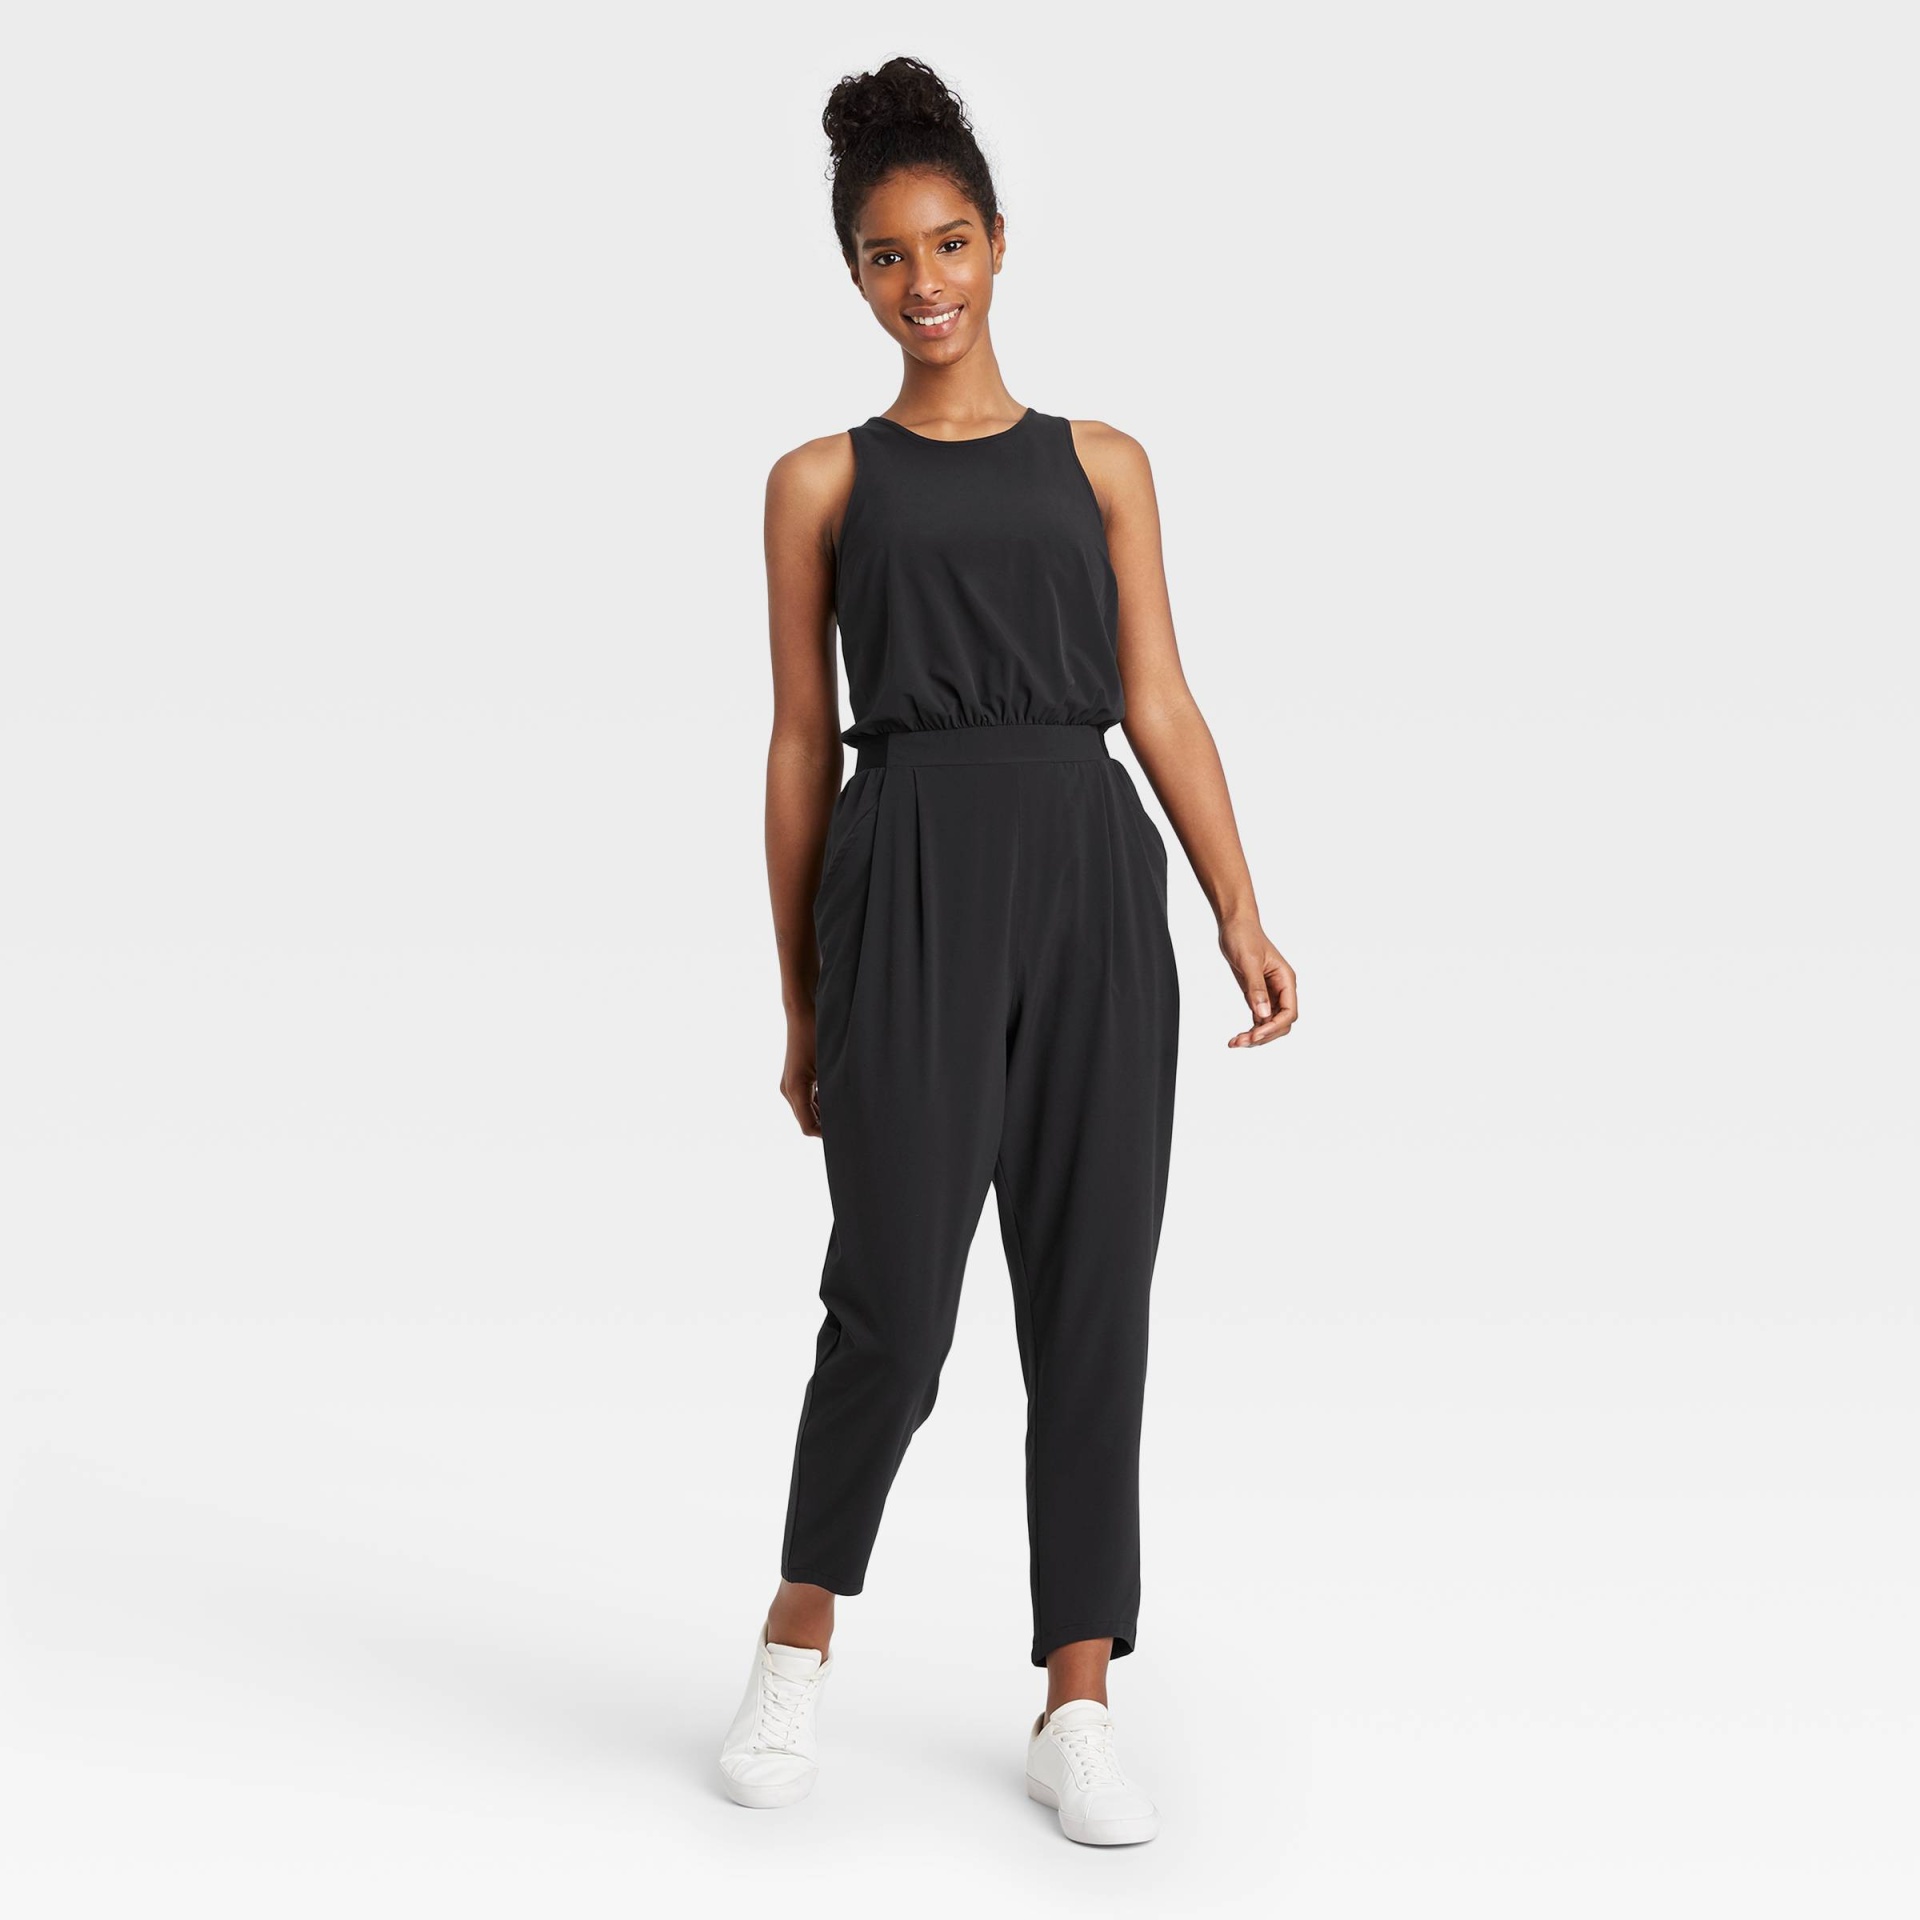 MOVE THEOLOGY New! Colorblock Active Performance Jumpsuit, SIZE S. Black  Color.